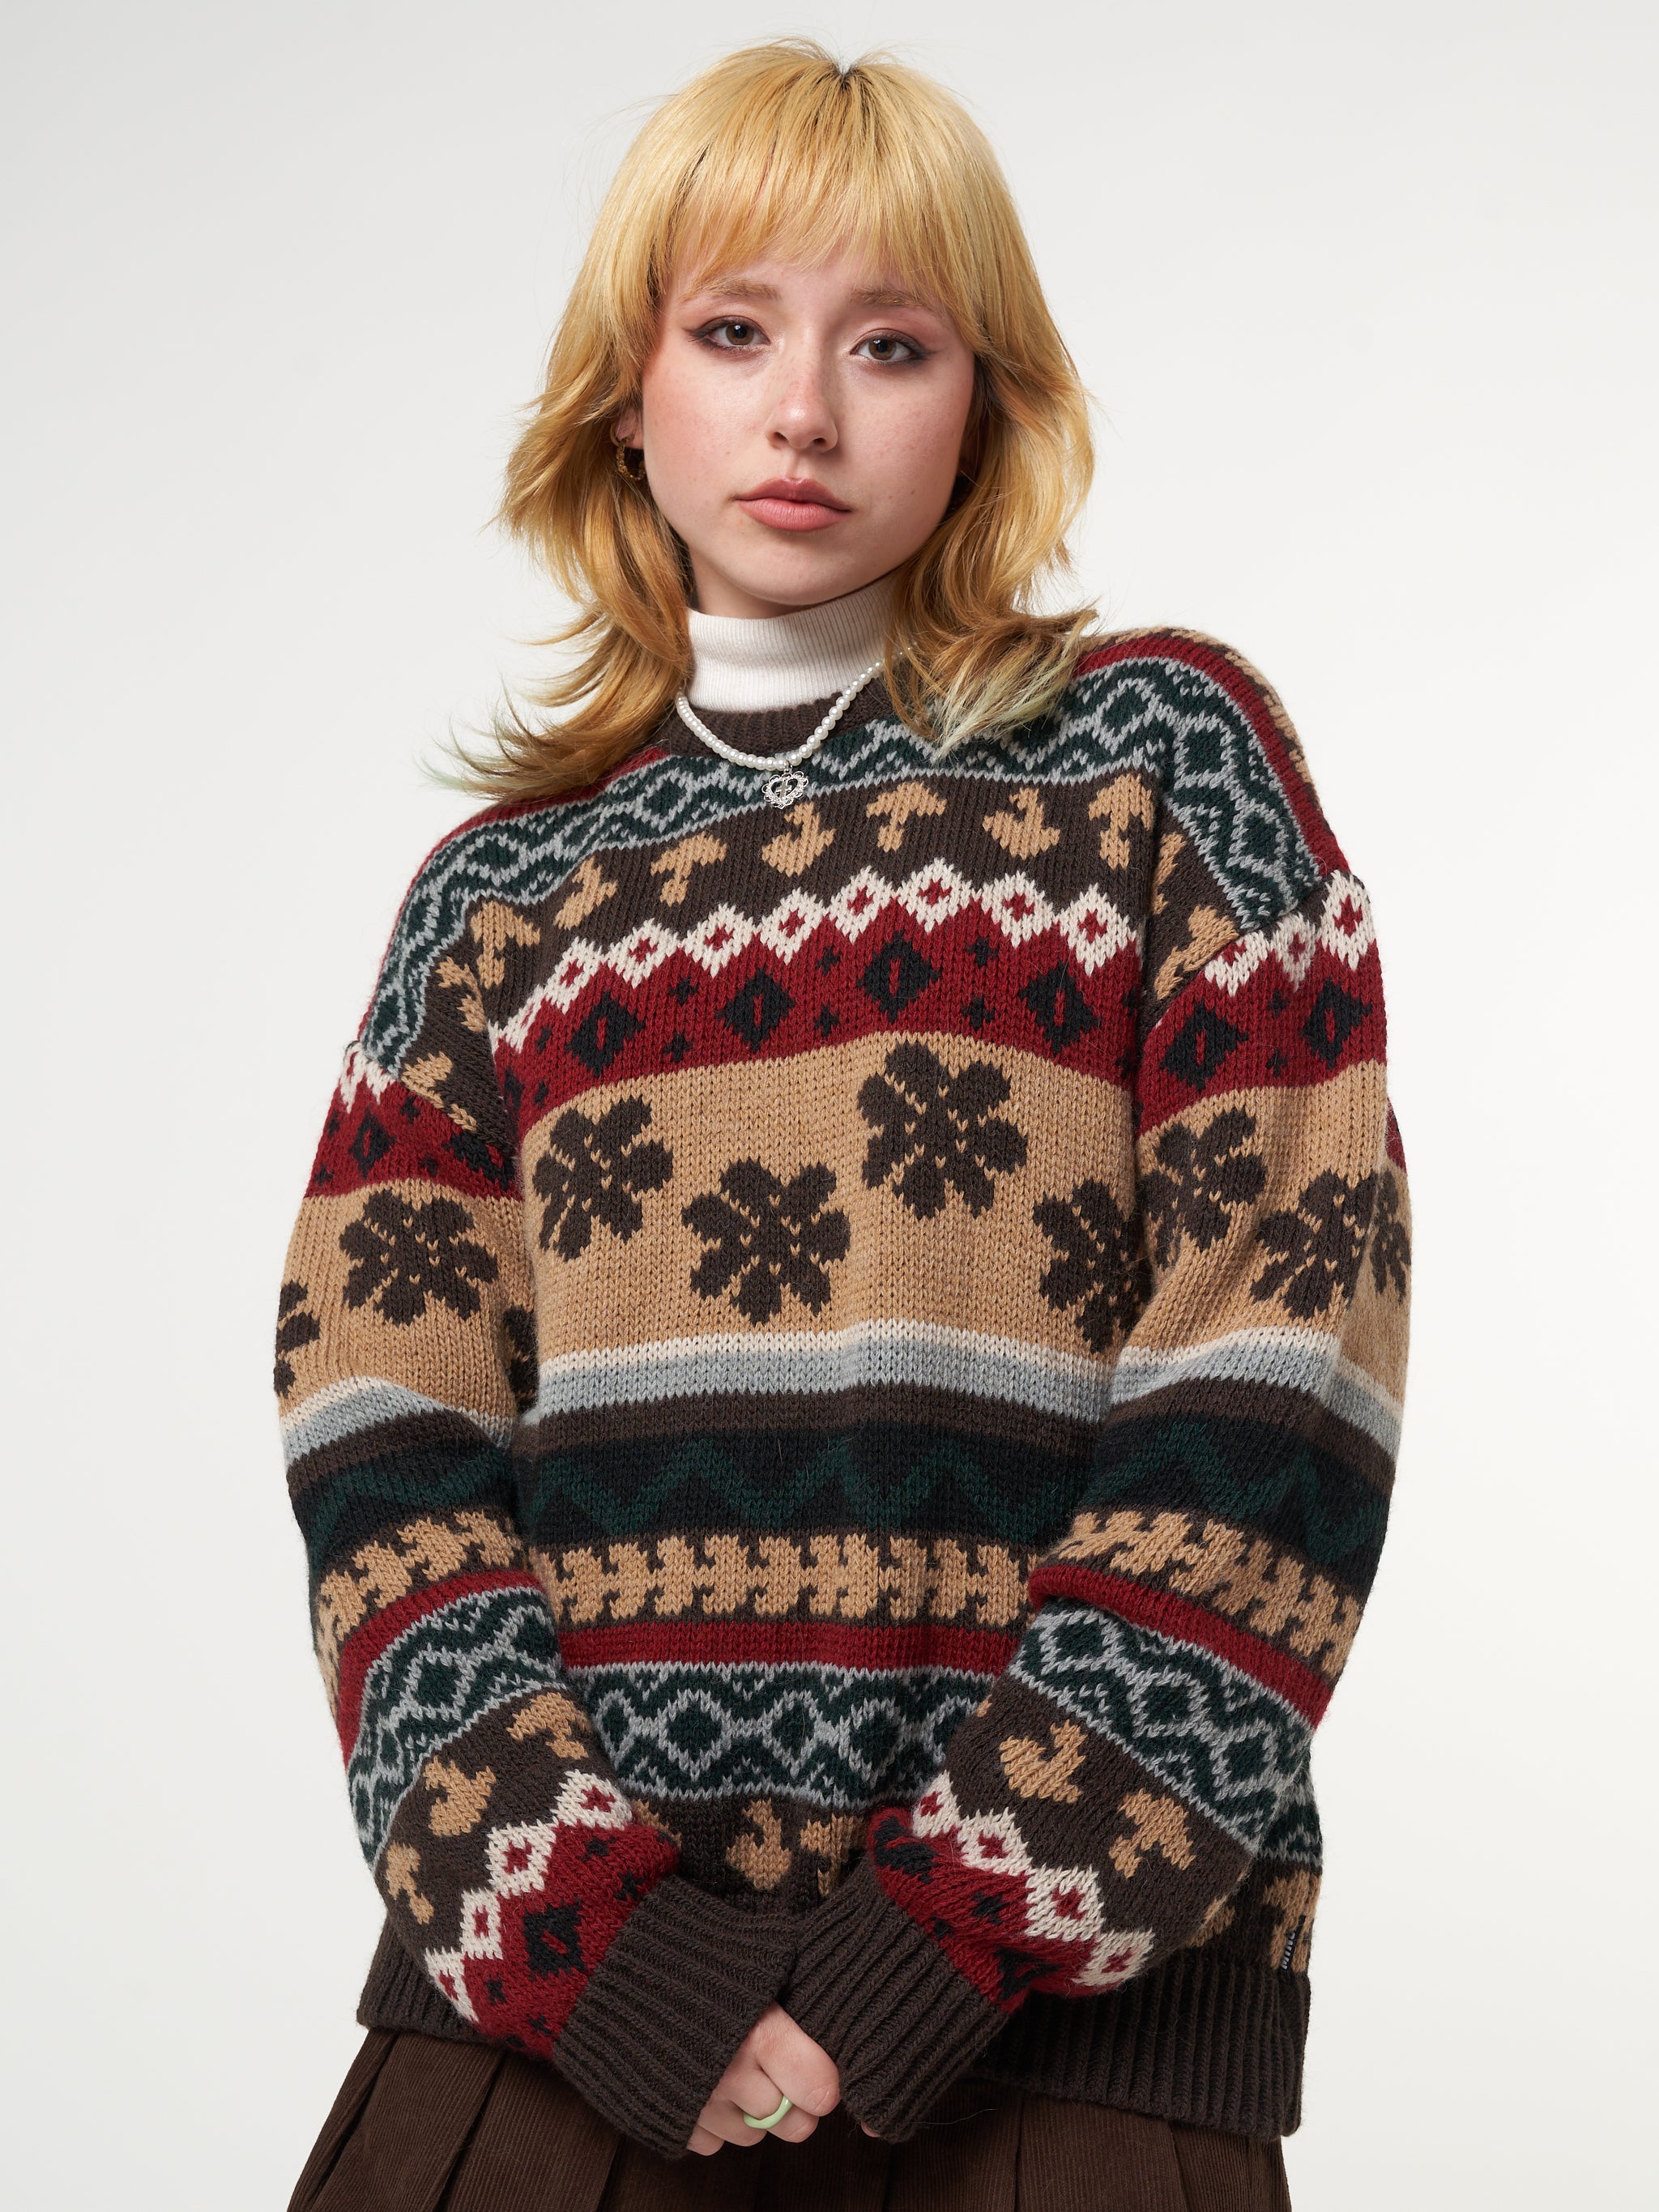 Jacquard knit jumper featuring geometric vintage striped pattern in brown, red and grey